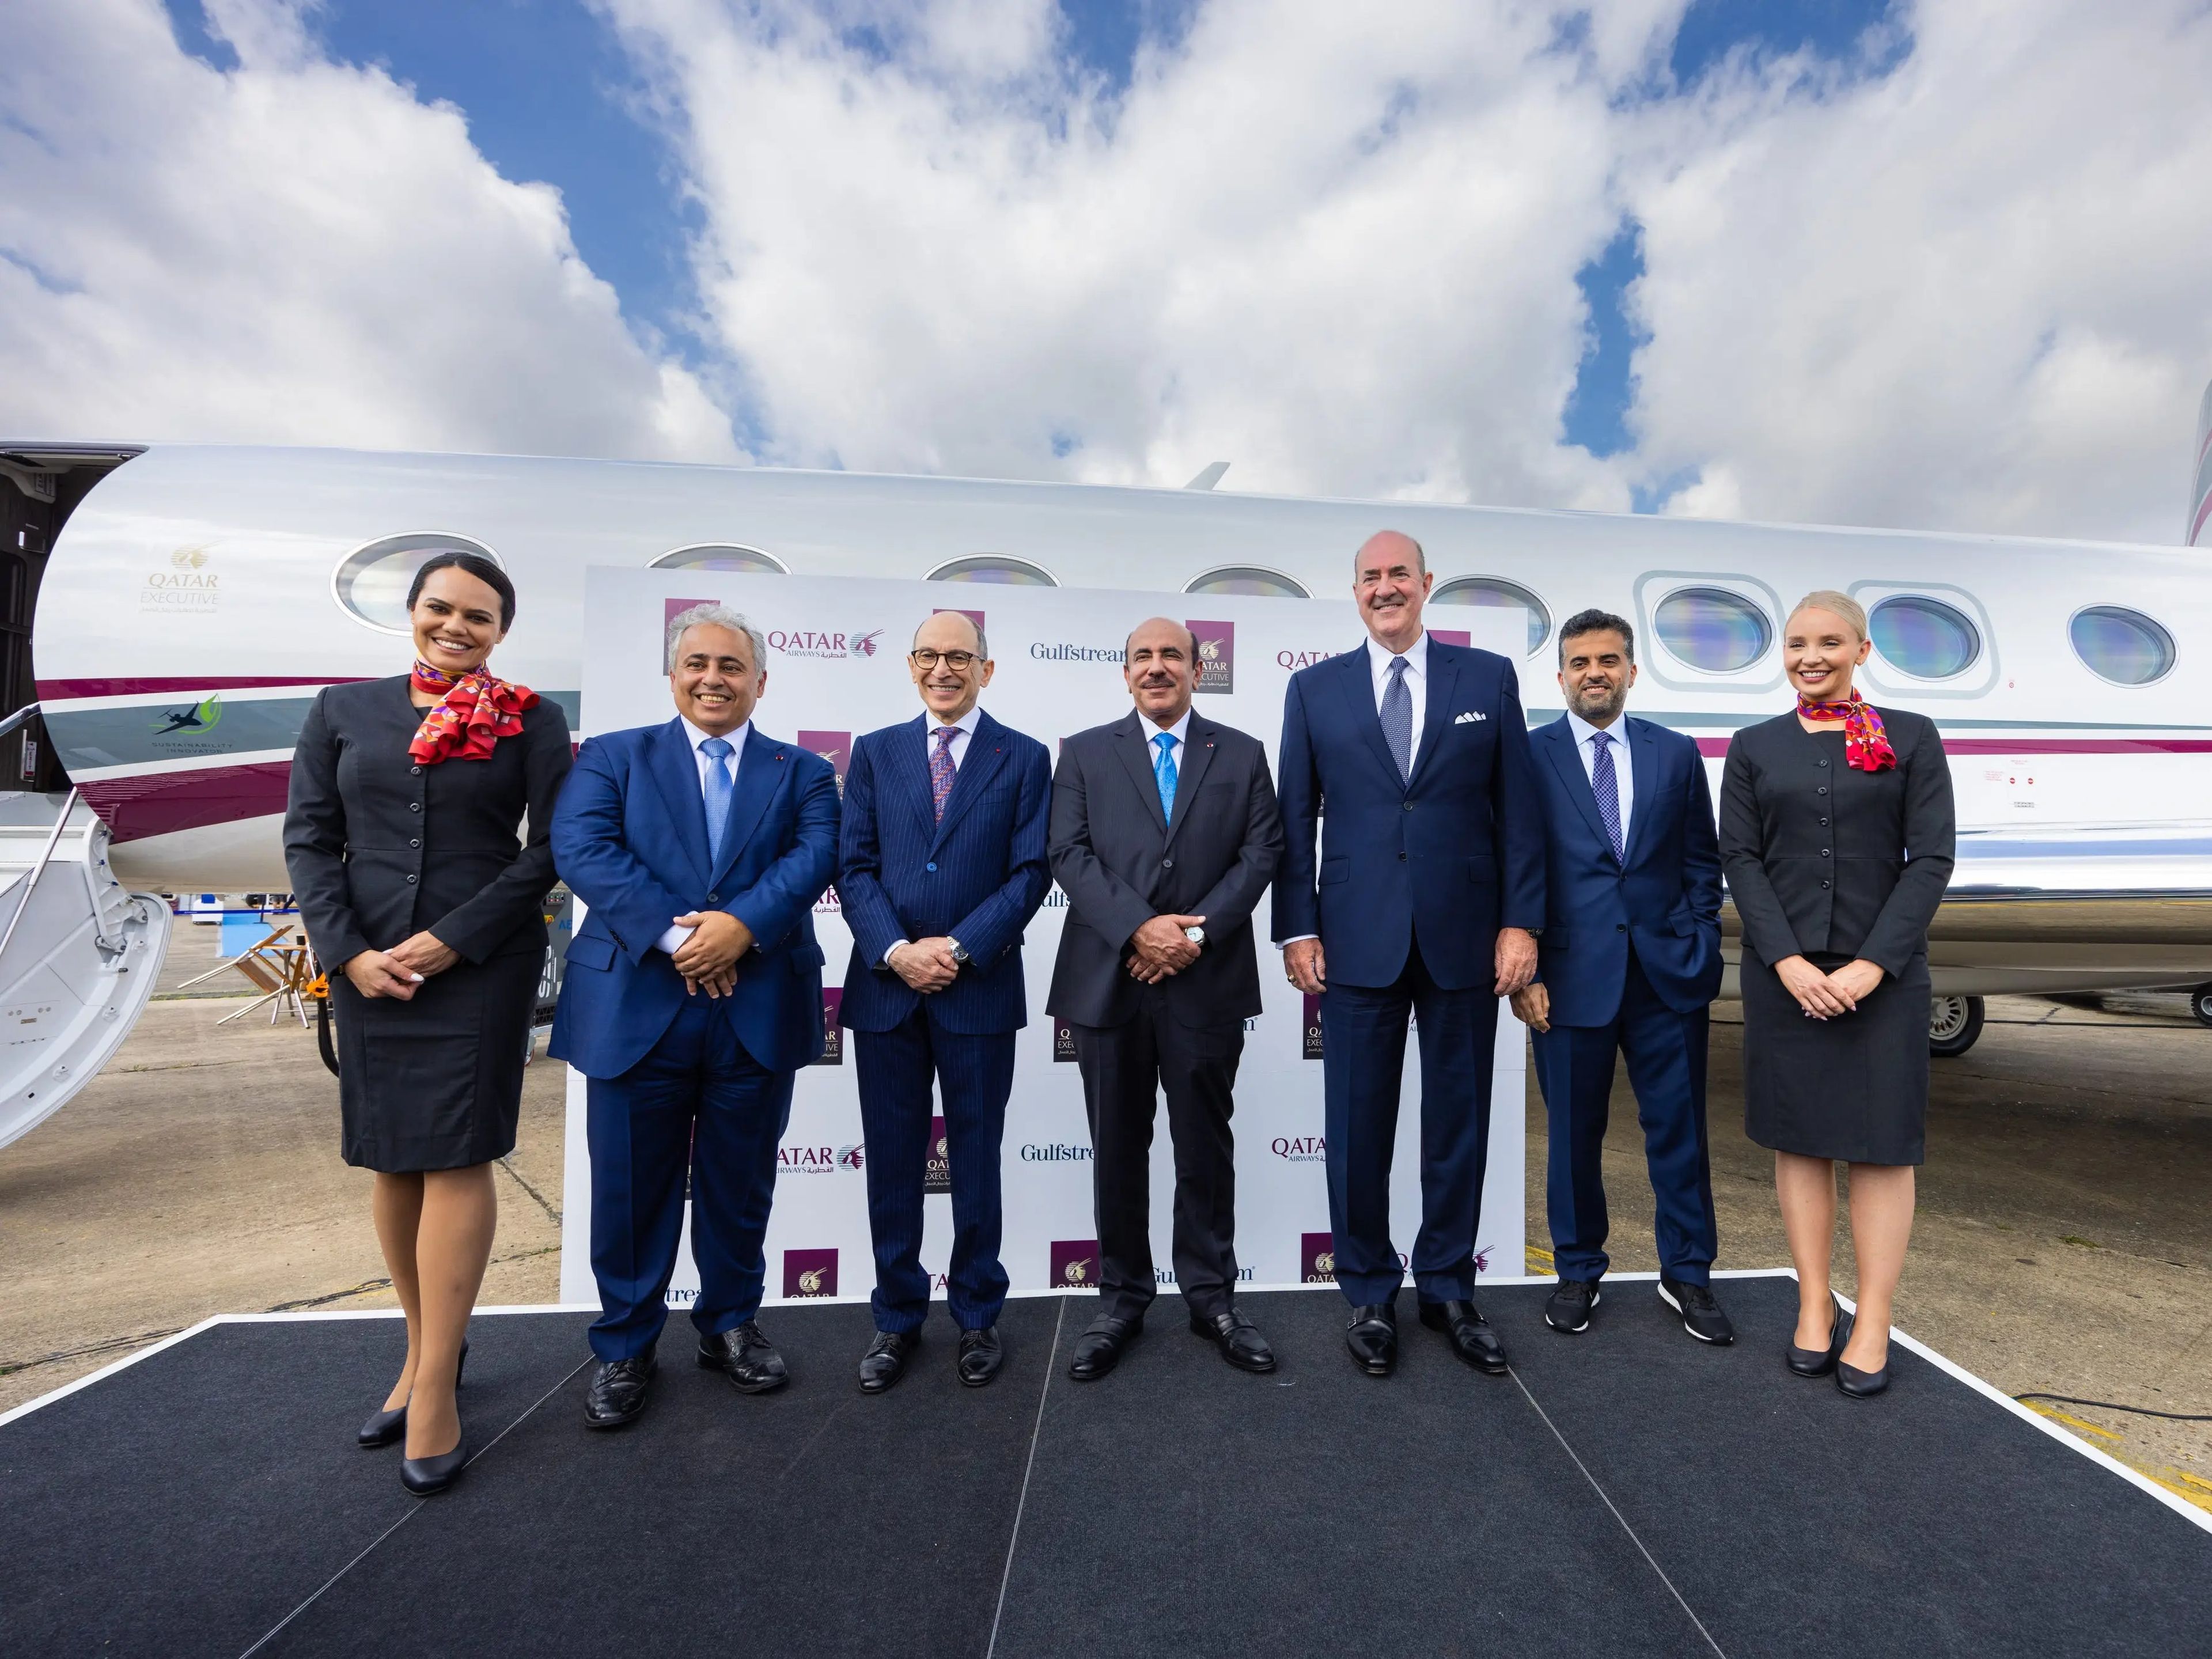 Qatar Airways CEO with cabin crew and other Qatar and Gulfstream executives standing in front of the G700.